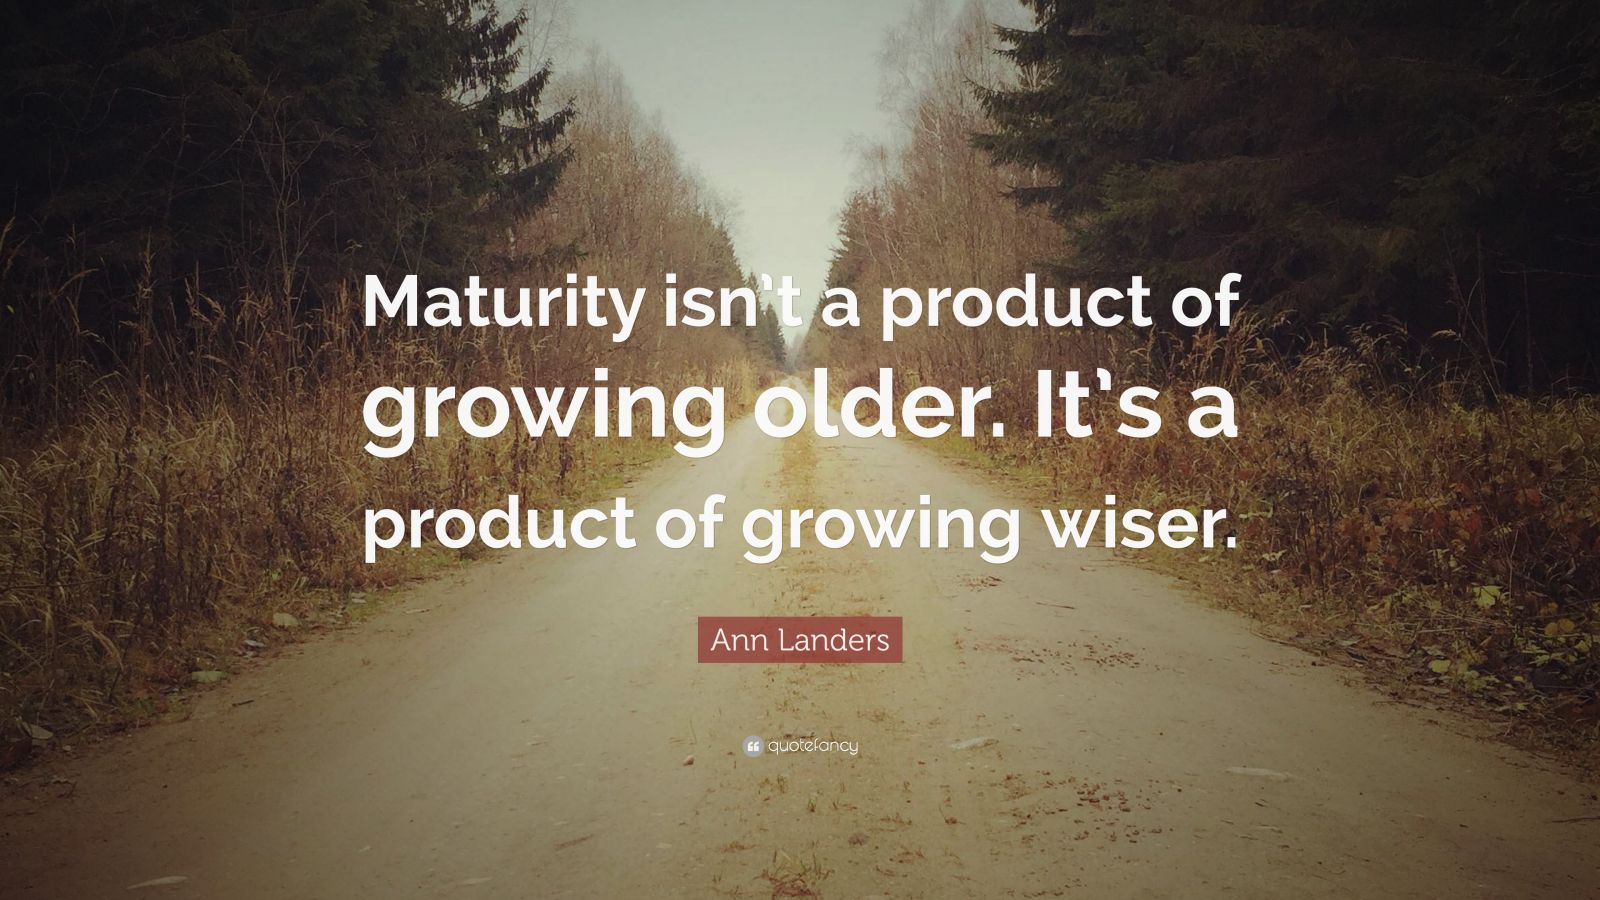 Ann Landers Quote “Maturity isn’t a product of growing